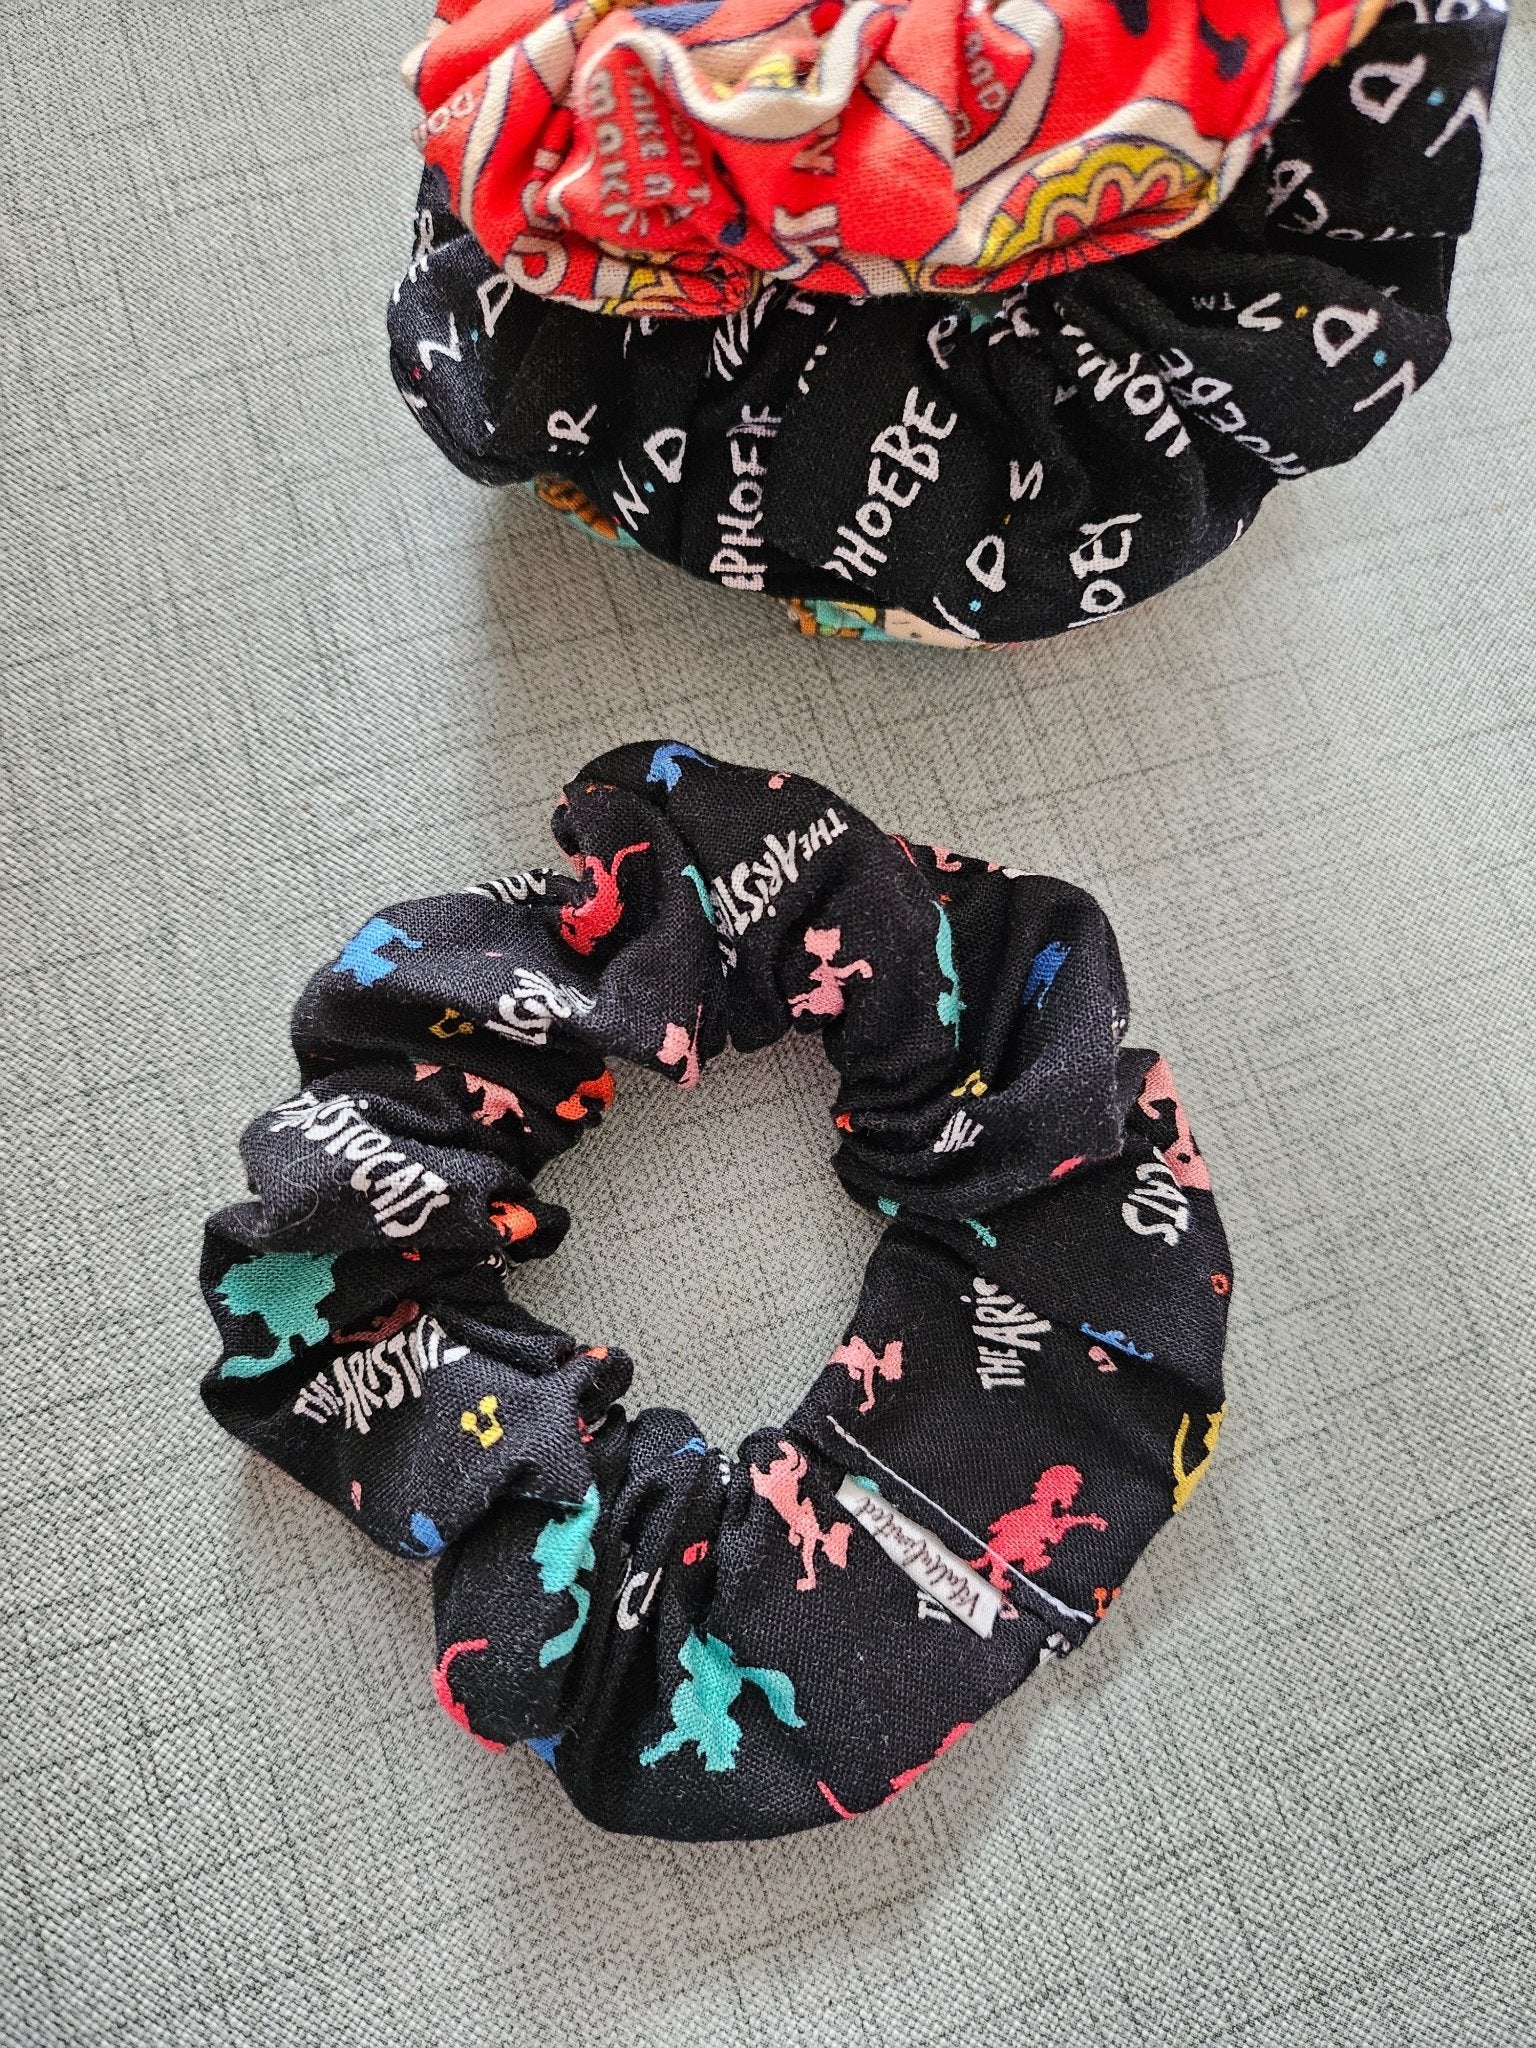 X Small Thin Elastic Patterned Scrunchies - VitaUnlimited